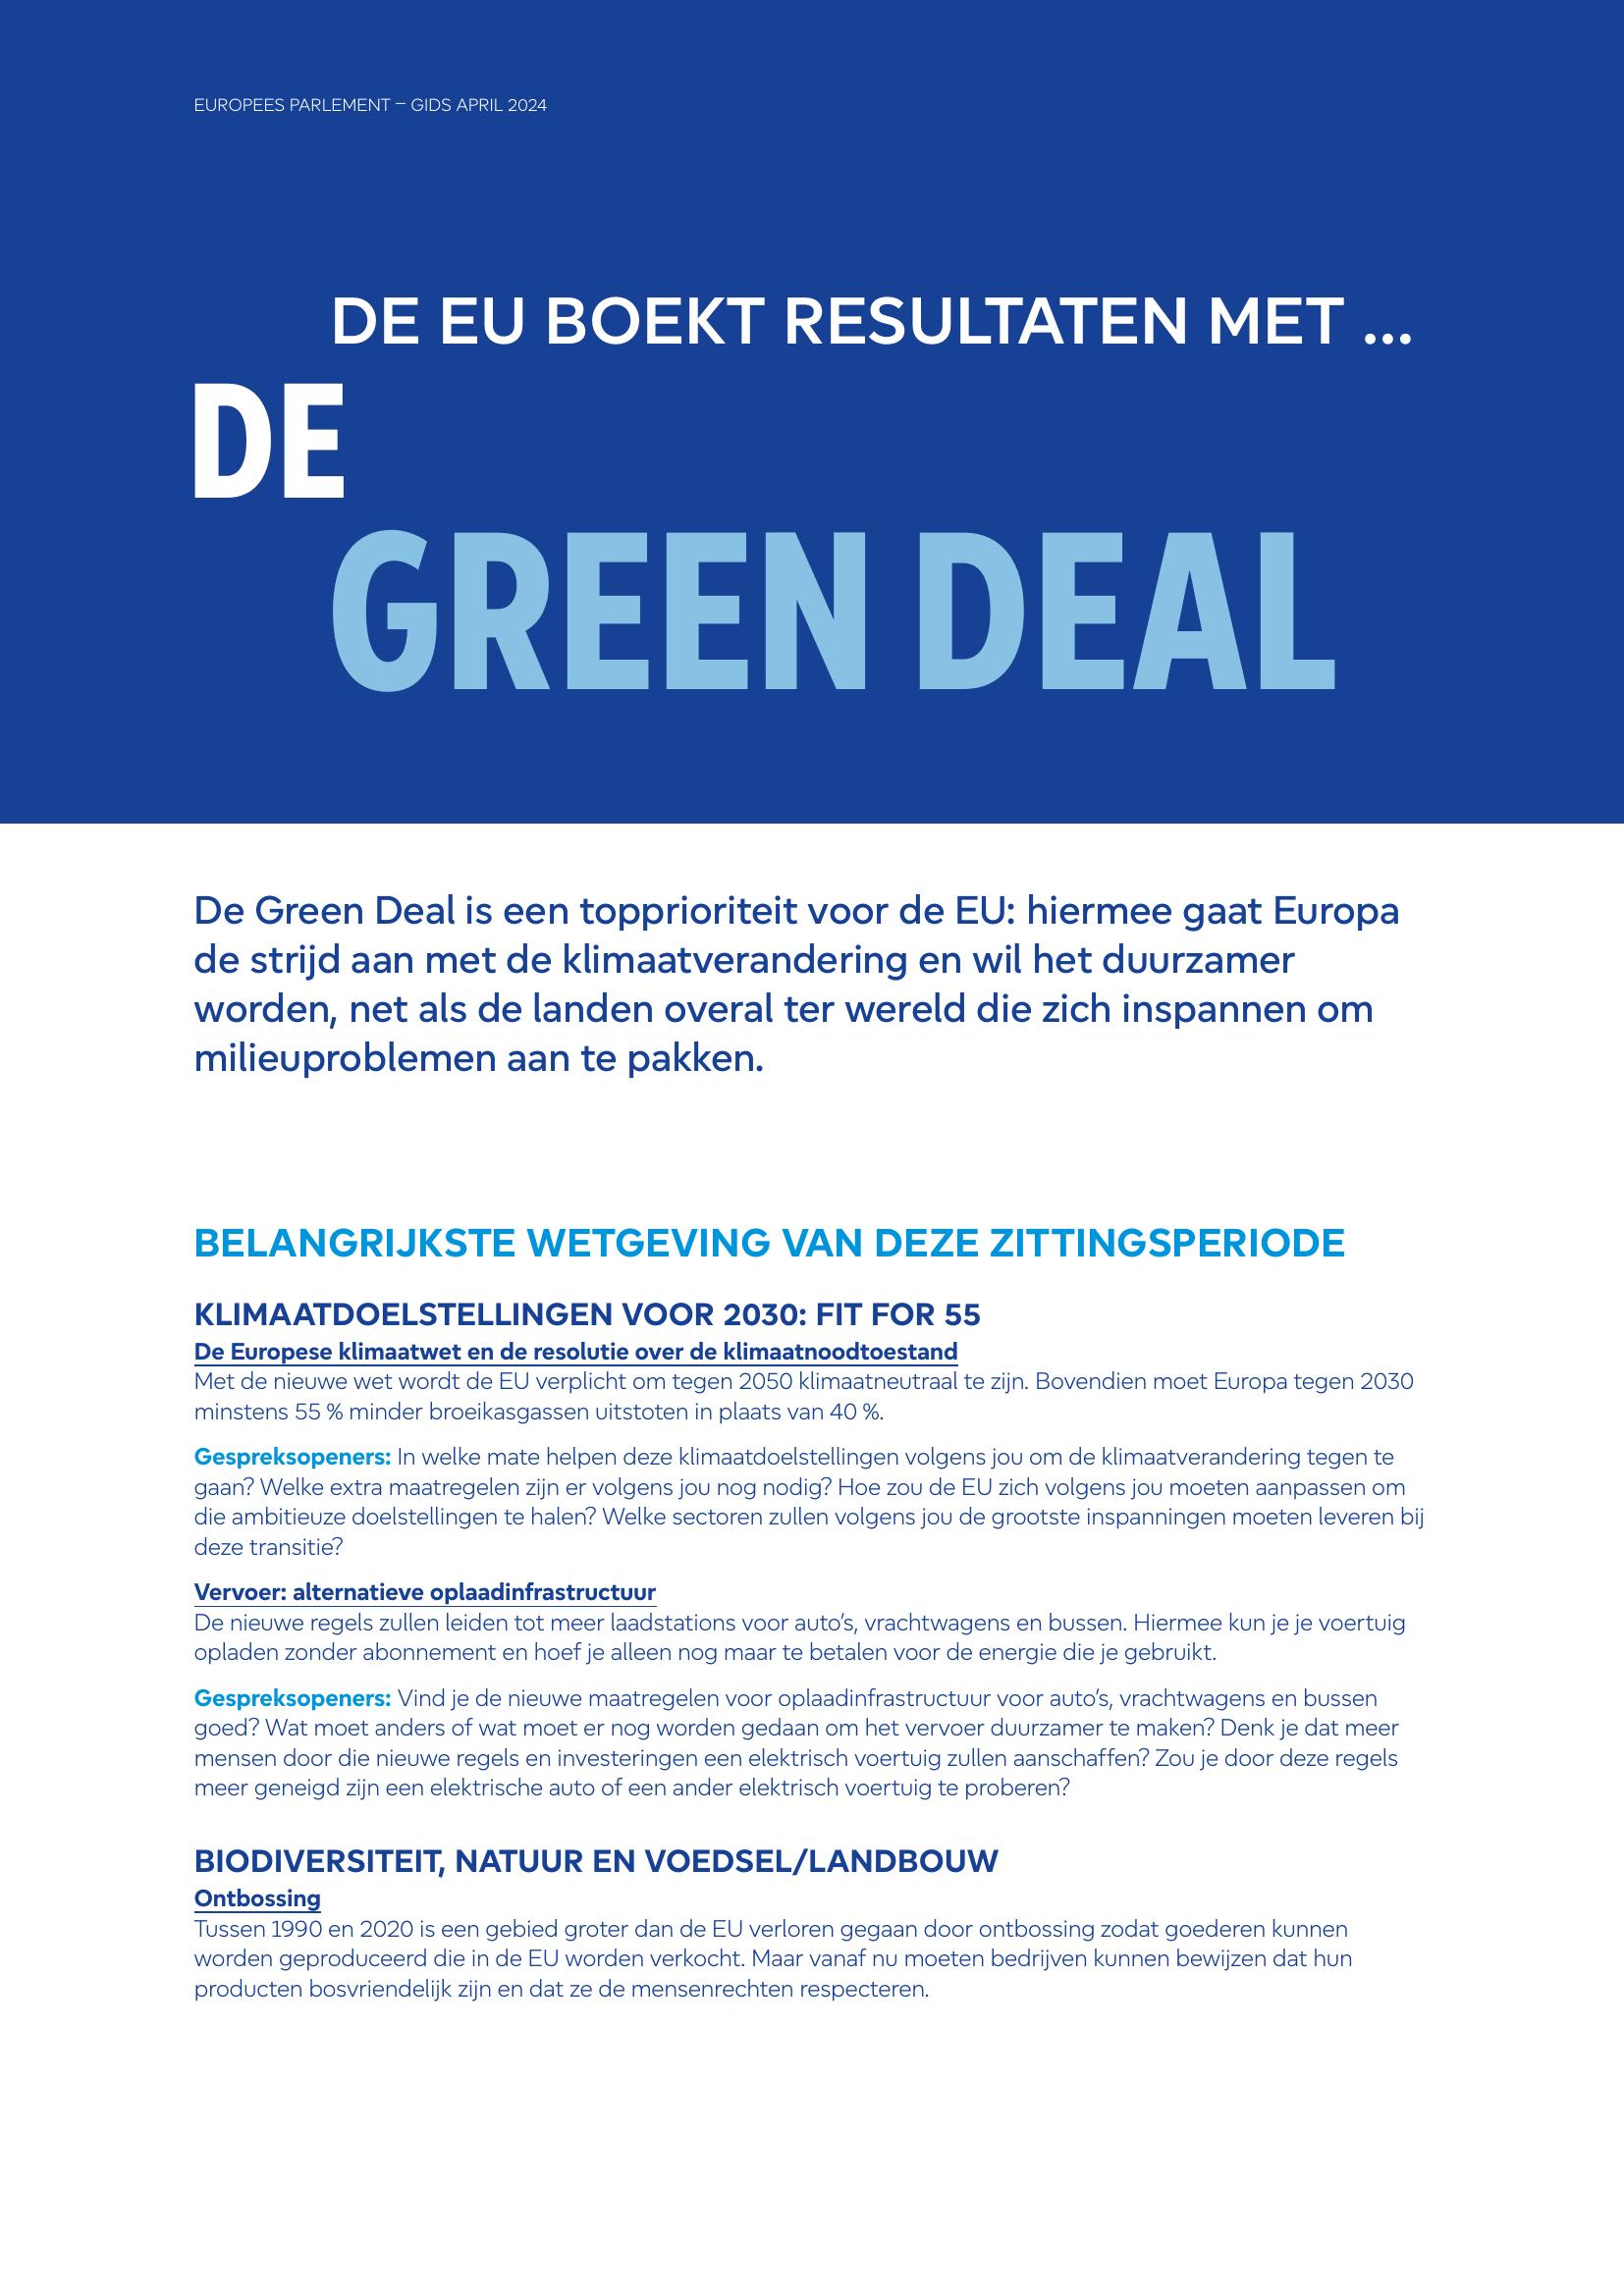 Together.eu_one-pager_GreenDeal_web.pdf